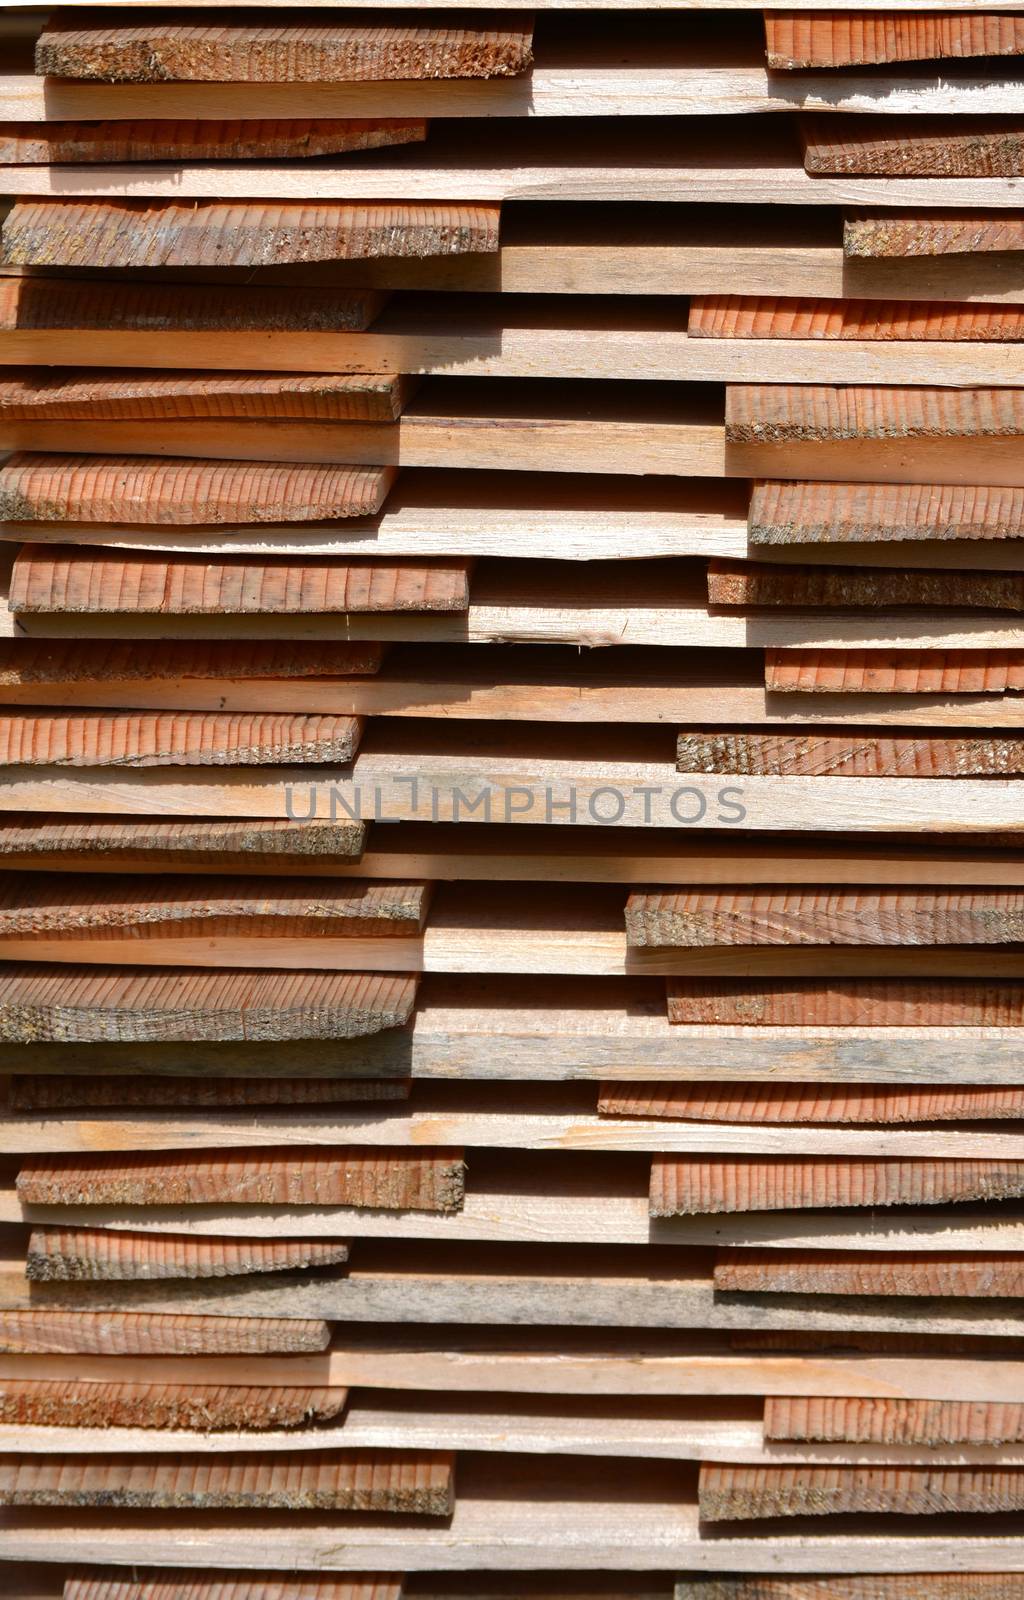 Stack of shingles laid to dry